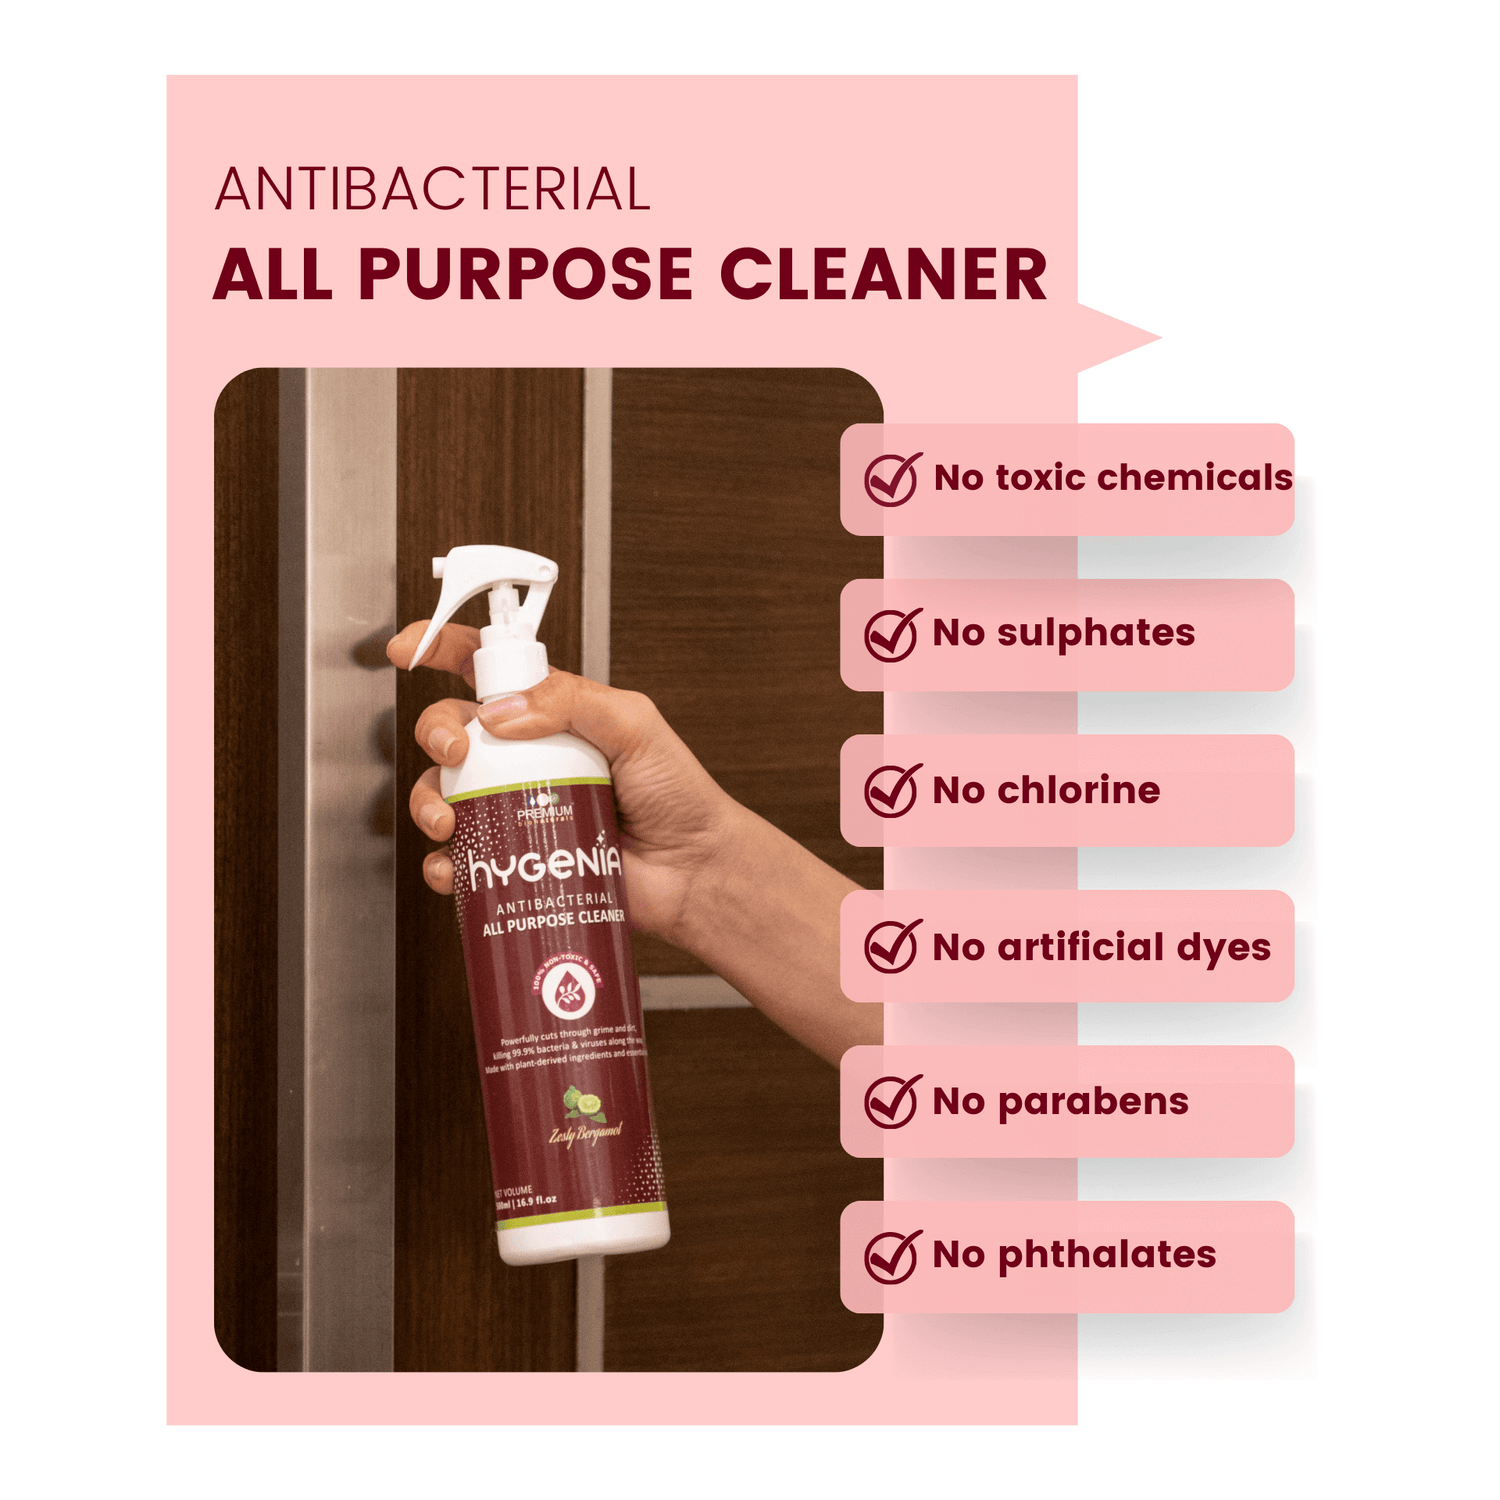 Transform your dining experience with our table cleaner – gentle, effective, and organically spotless.